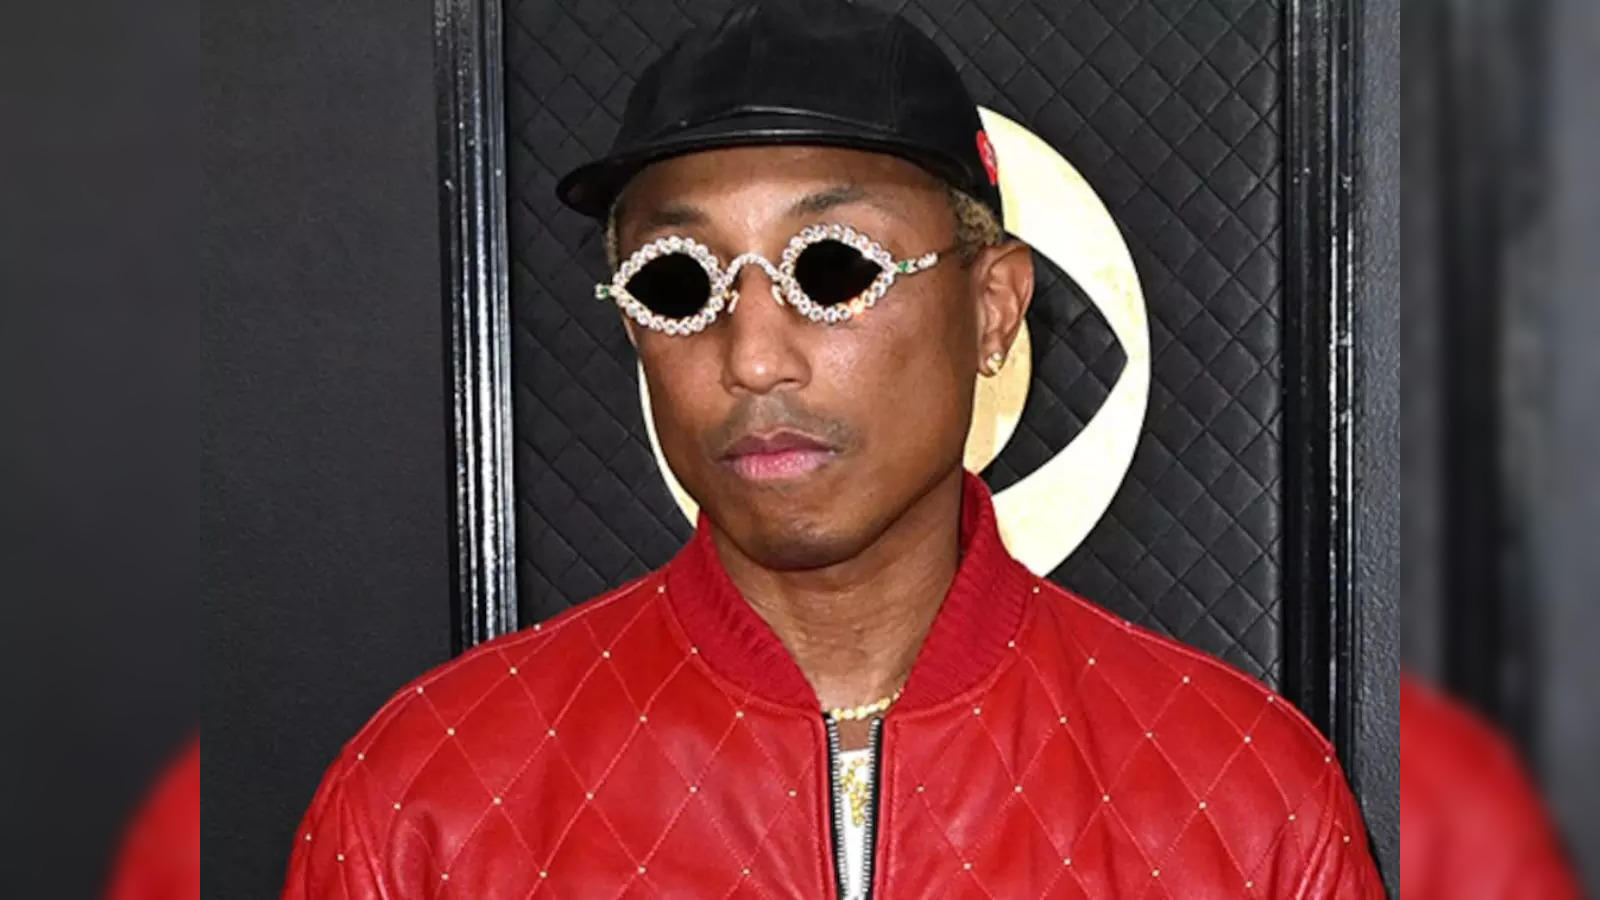 PHARRELL WILLIAMS' WIFE AND KIDS SUPPORT HIM AT HIS 1ST LOUIS